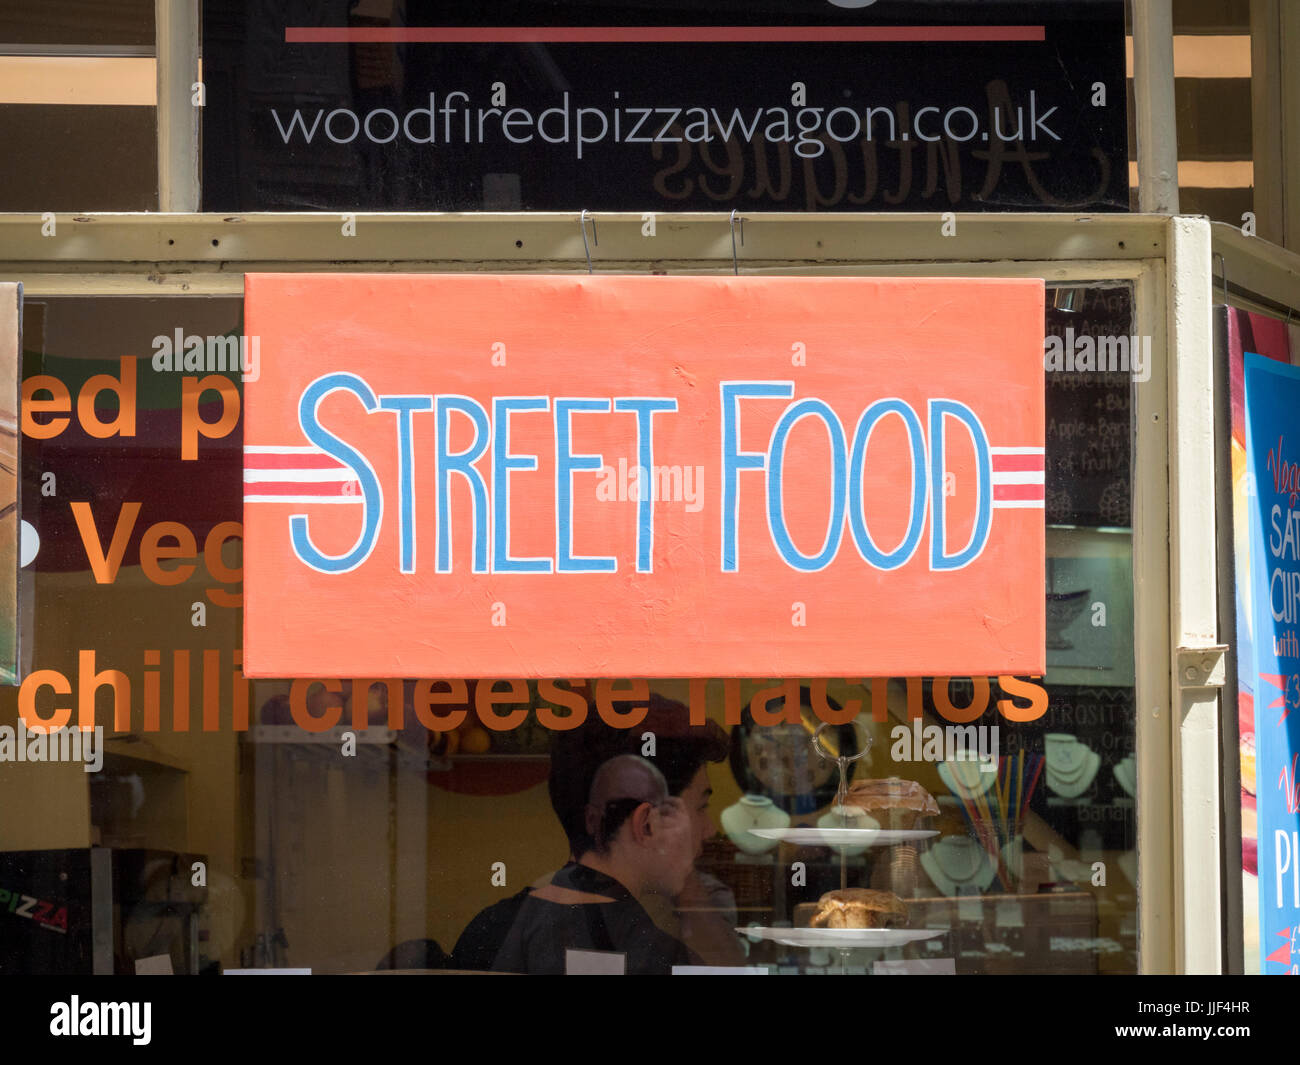 A sign for street food in a cafe window in Norwich Norfolk UK Stock Photo